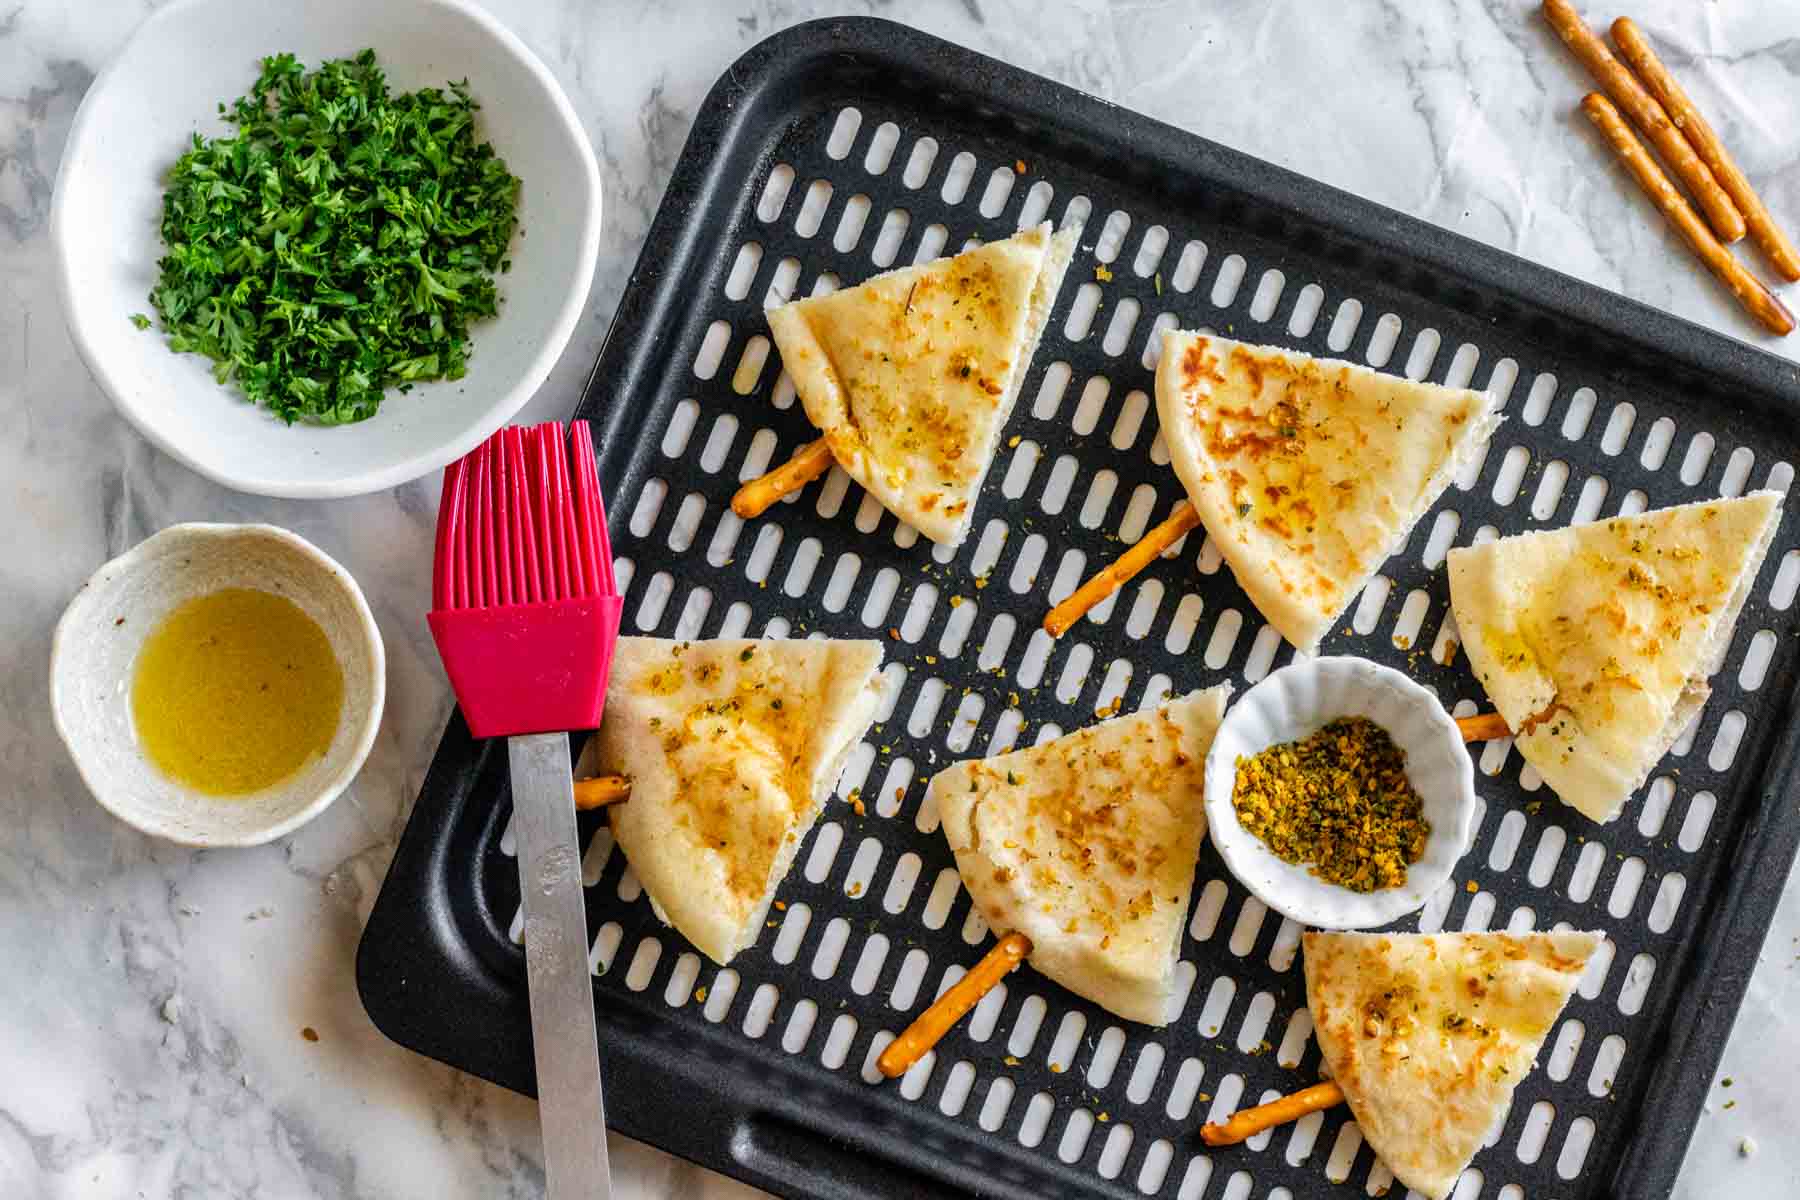 Pita triangles lay on an air fryer baking sheet with oil and za'atar seasoning on top.